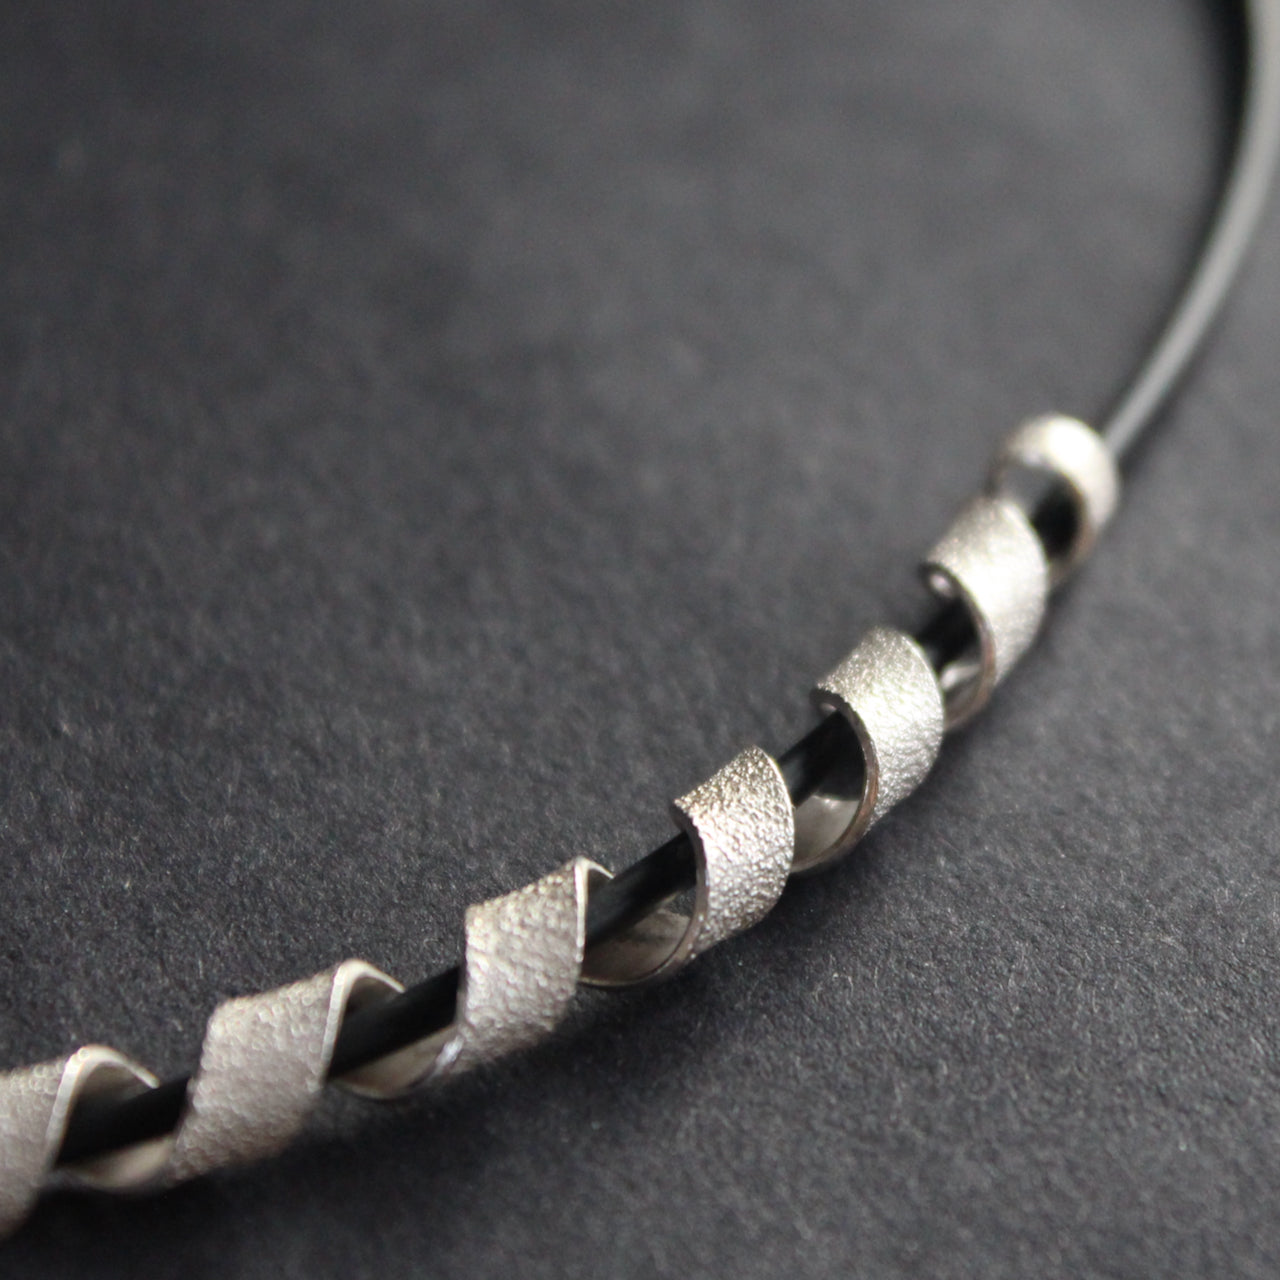 close up detail of silver helix twisted necklace on black leather band by Beverly Bartlett.